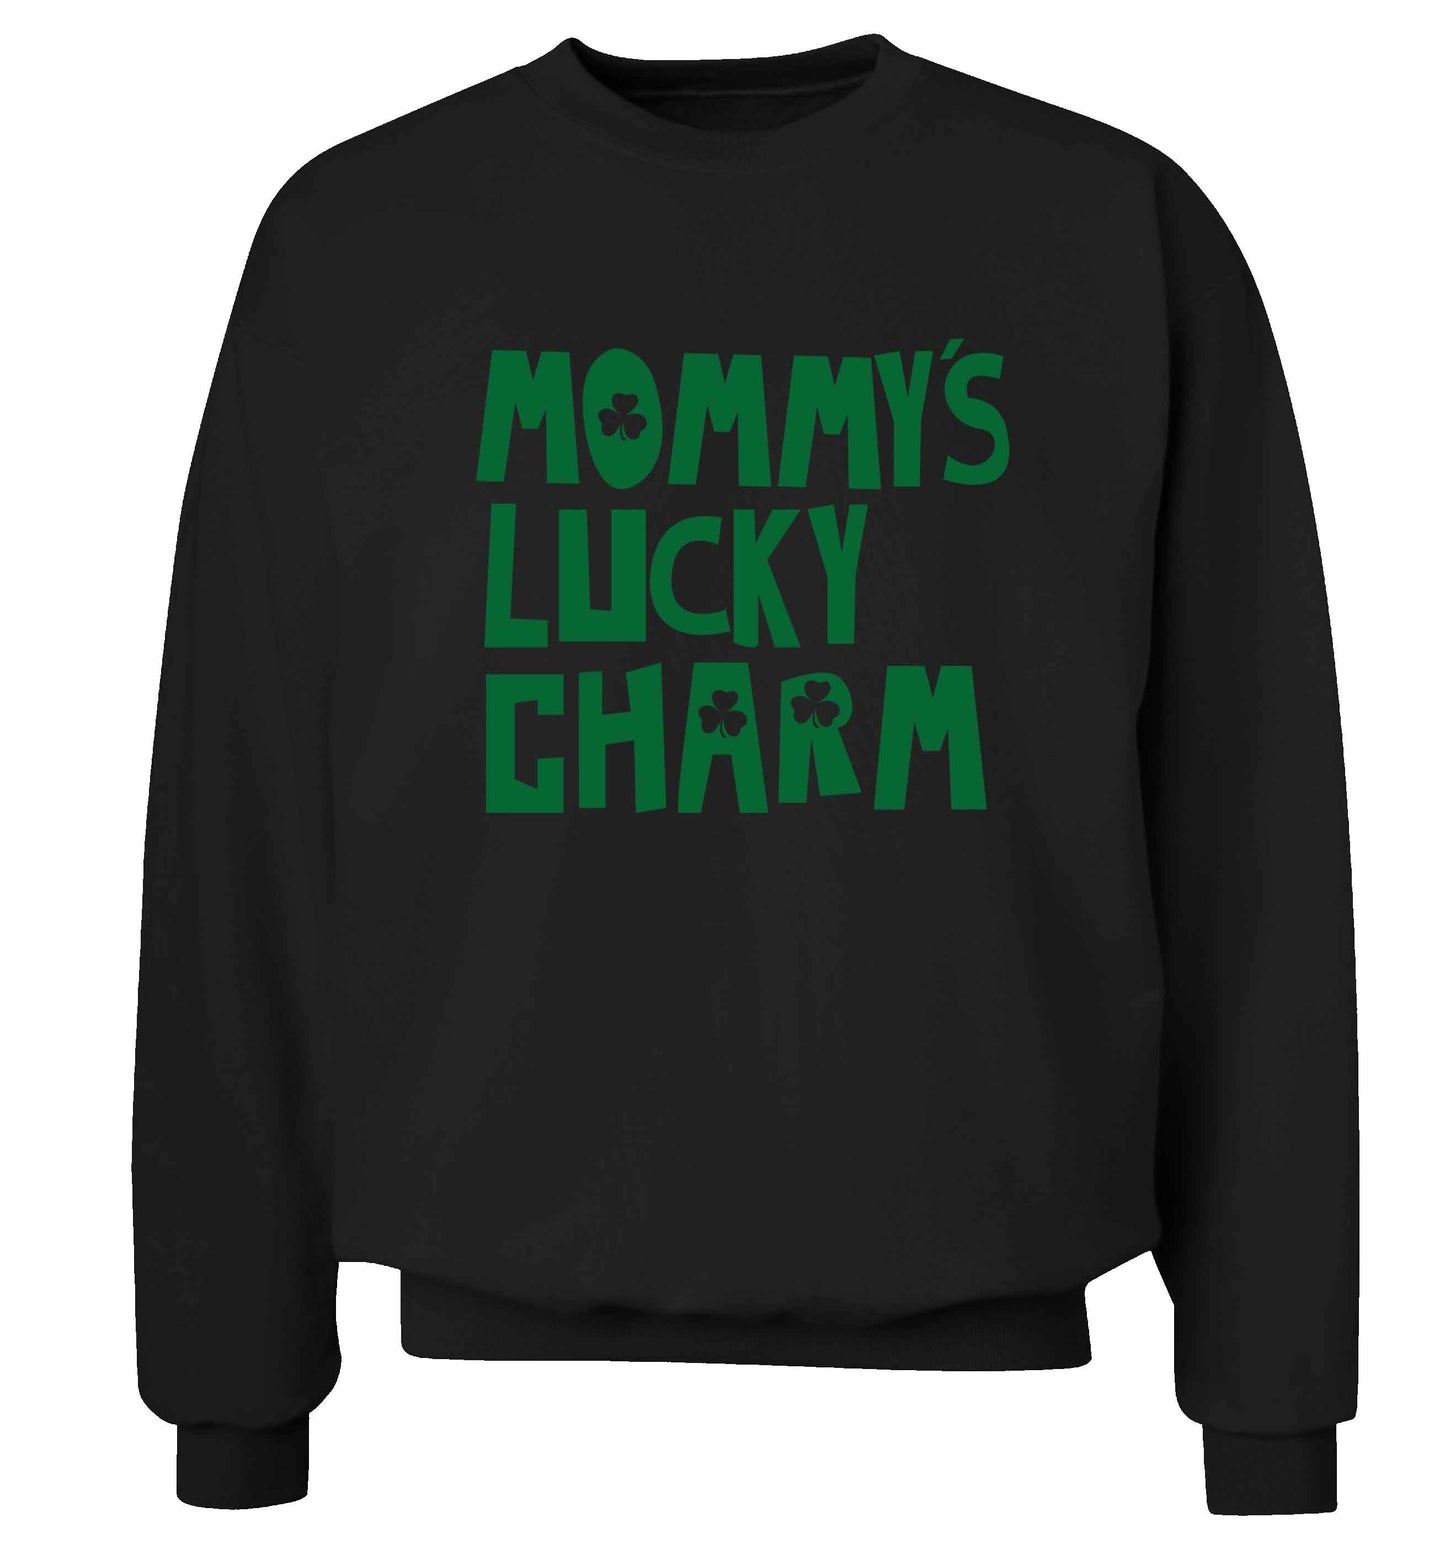 Mommy's lucky charm adult's unisex black sweater 2XL